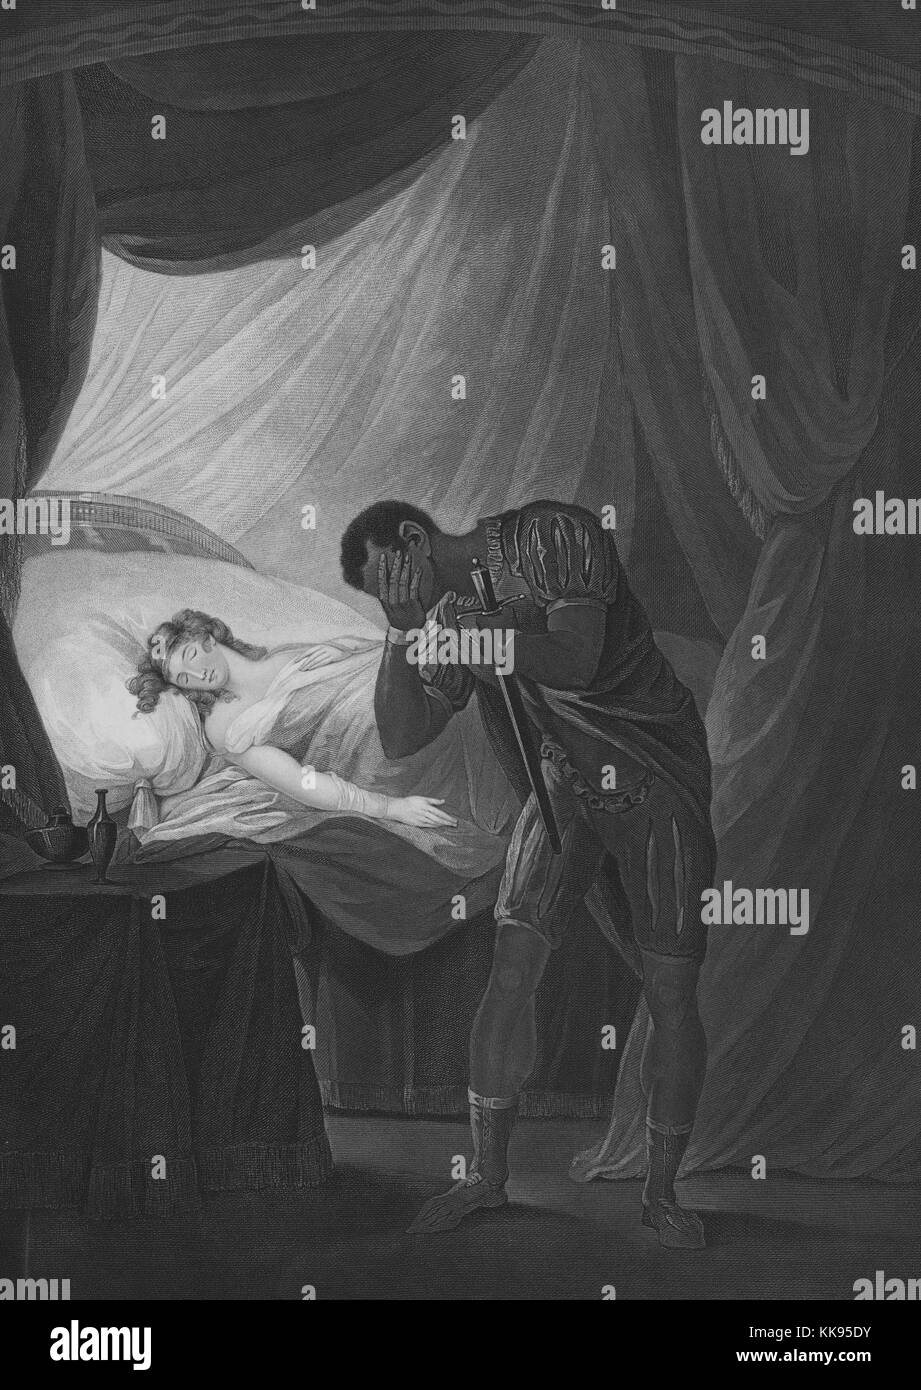 Engraved illustration 'Desdemona in bed asleep', from Othello (Act V, scene 2), part of 'A Collection of Prints, from Pictures Painted for the Purpose of Illustrating the Dramatic Works of Shakspeare, by the Artists of Great-Britain', published by John and Josiah Boydell, 1803. From the New York Public Library. Stock Photo